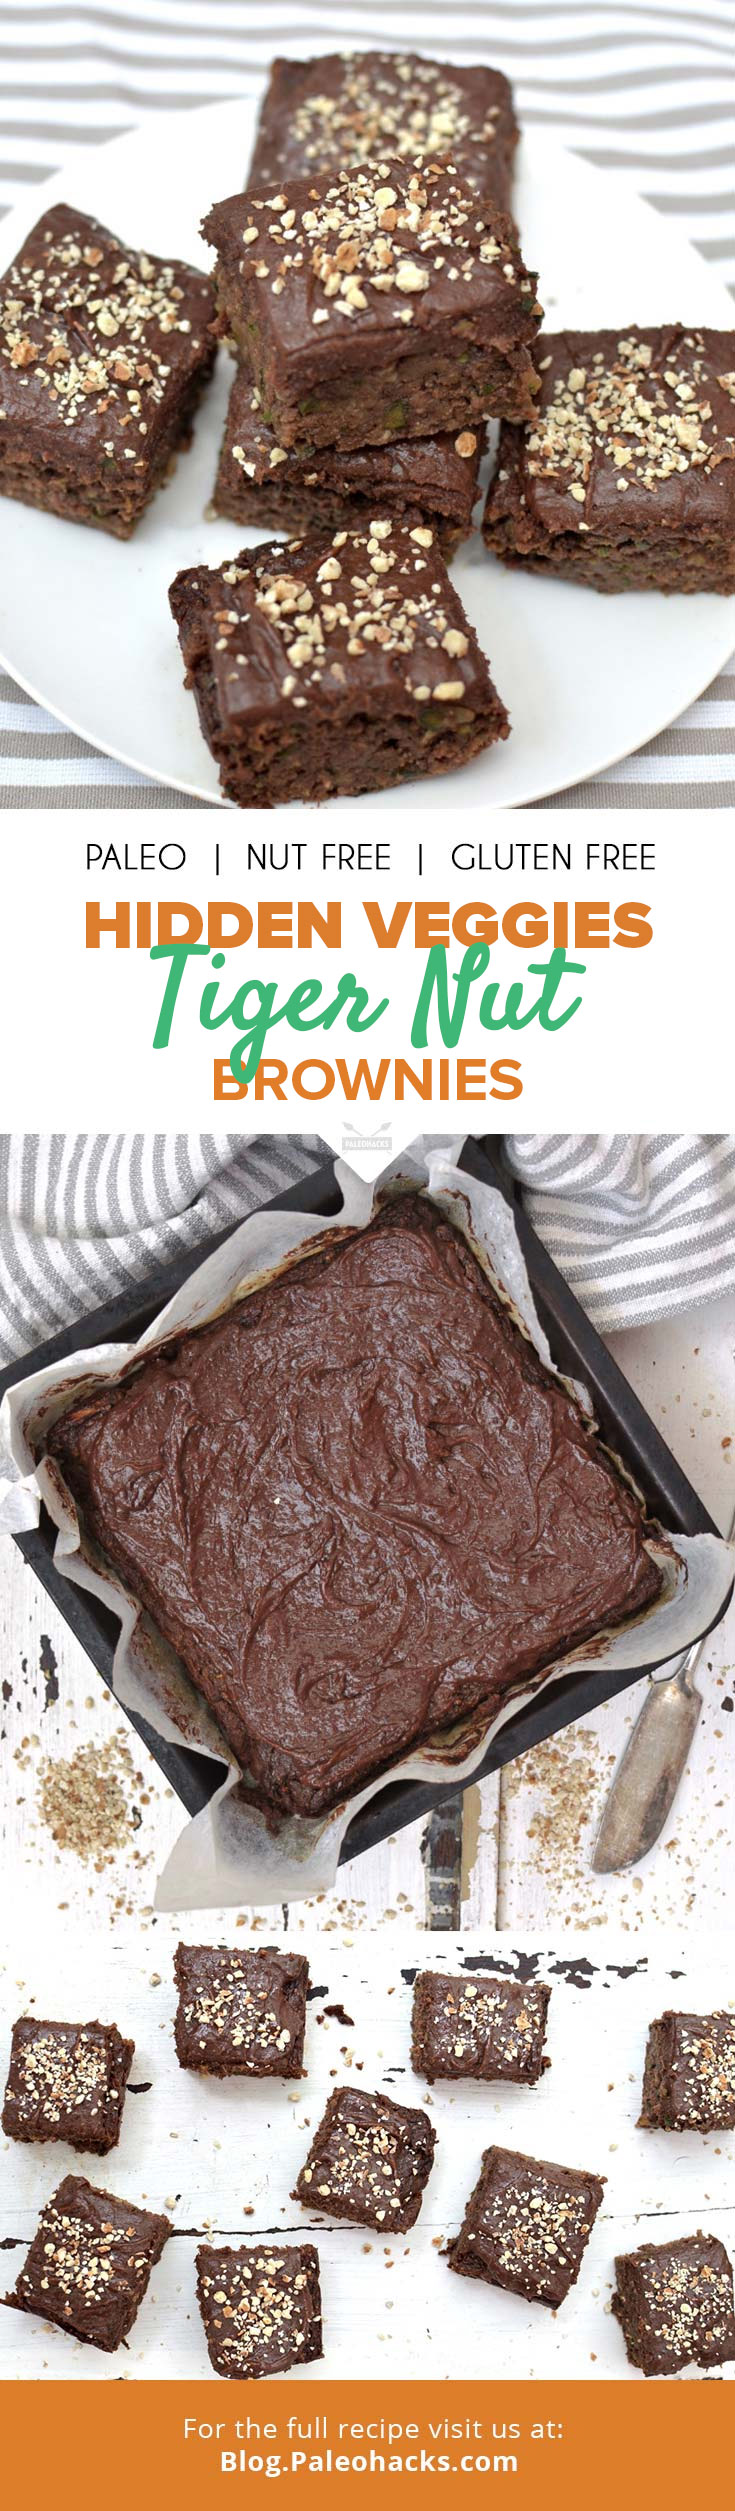 These naturally sweetened Hidden Veggies Tiger Nut brownies are a tasty way to use leftover zucchini and sneak in a healthy dose of veggies!